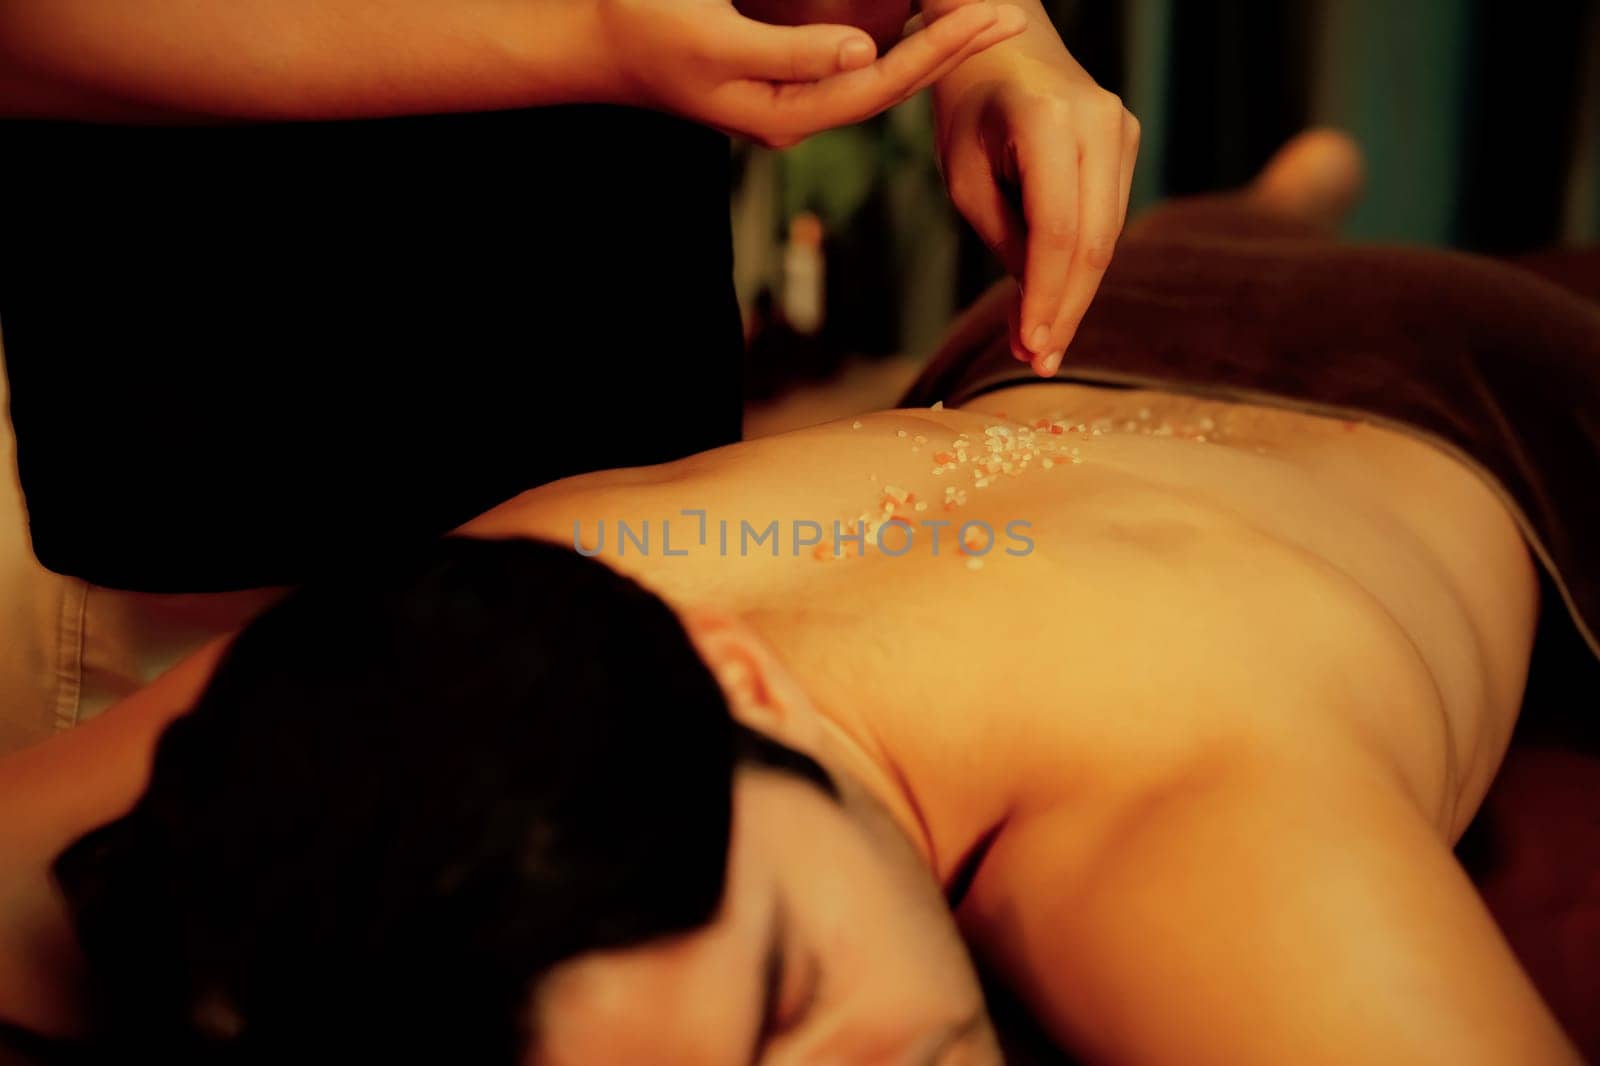 Man customer having exfoliation treatment in luxury spa. Quiescent by biancoblue